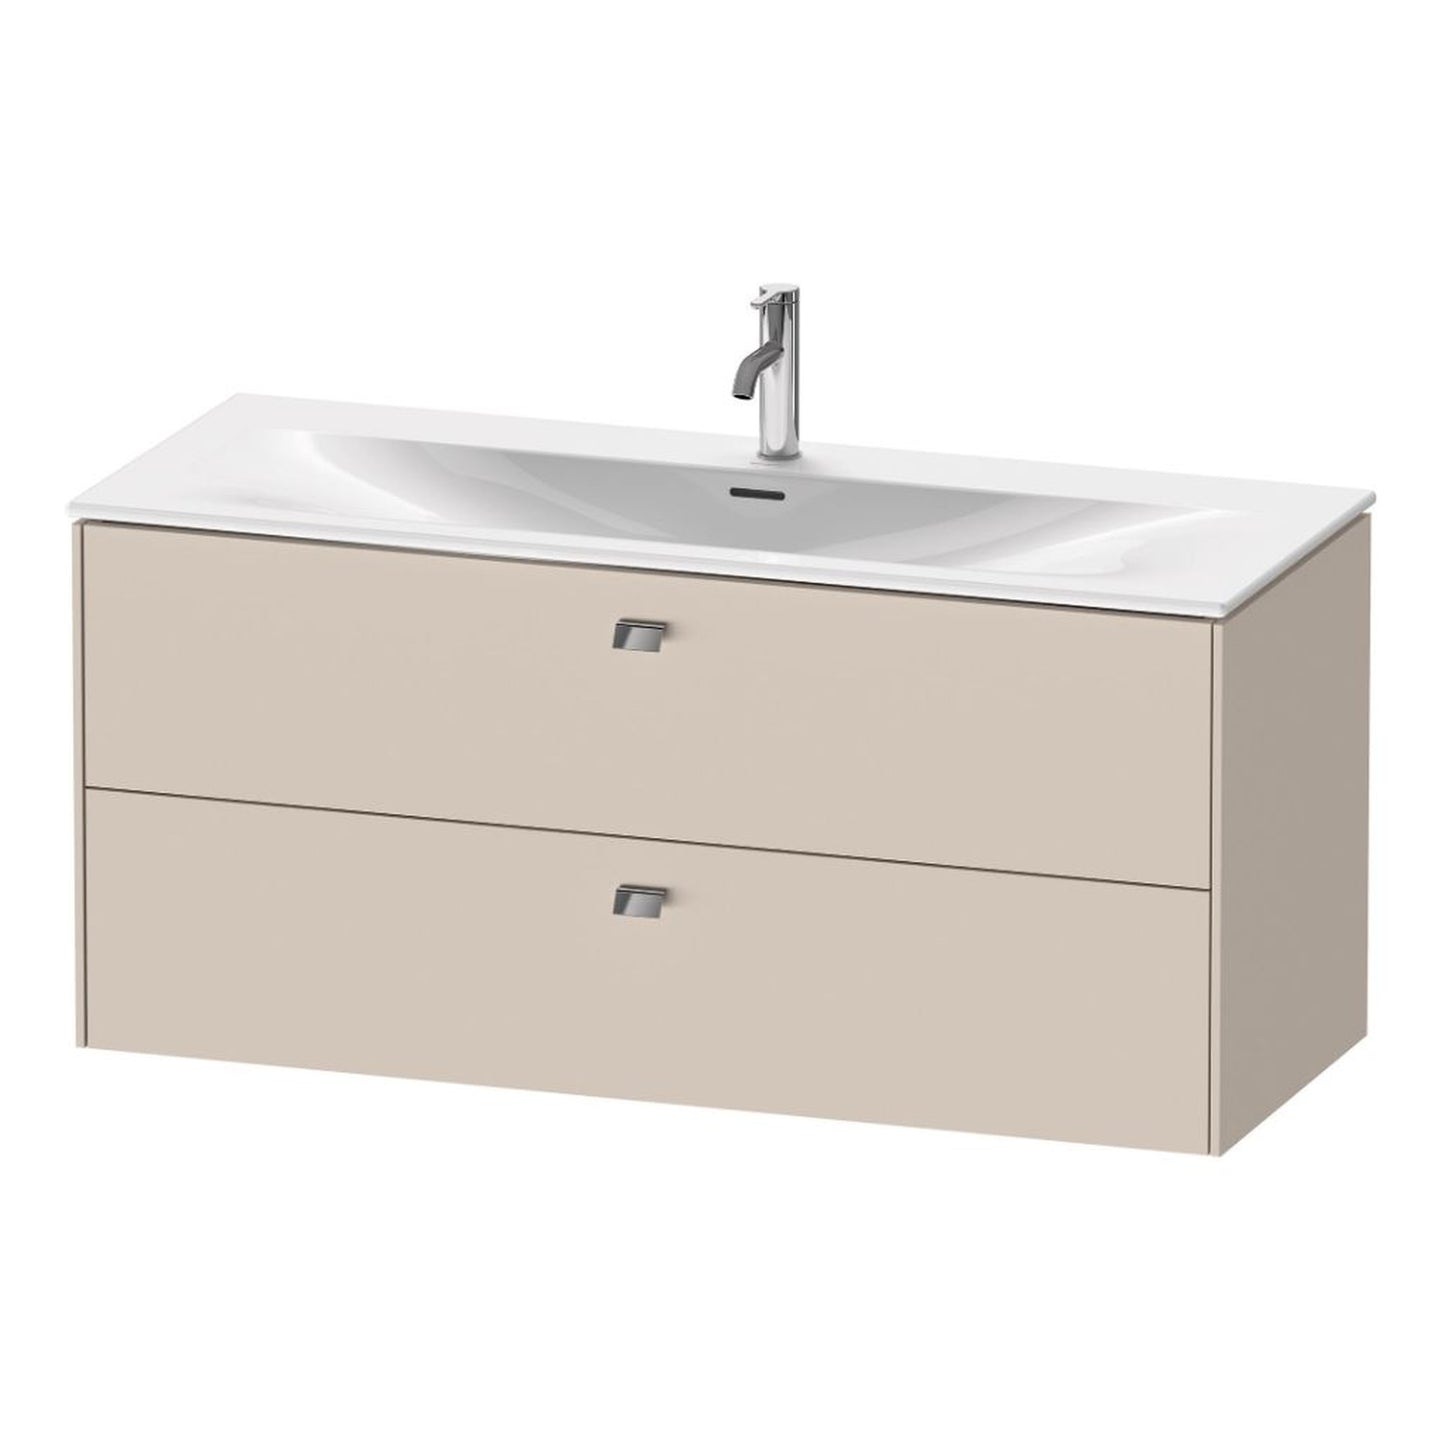 Duravit Brioso BR43140 48" x 22" x 19" Two Drawer Wall-Mount Vanity Unit in Taupe and Chrome Handle